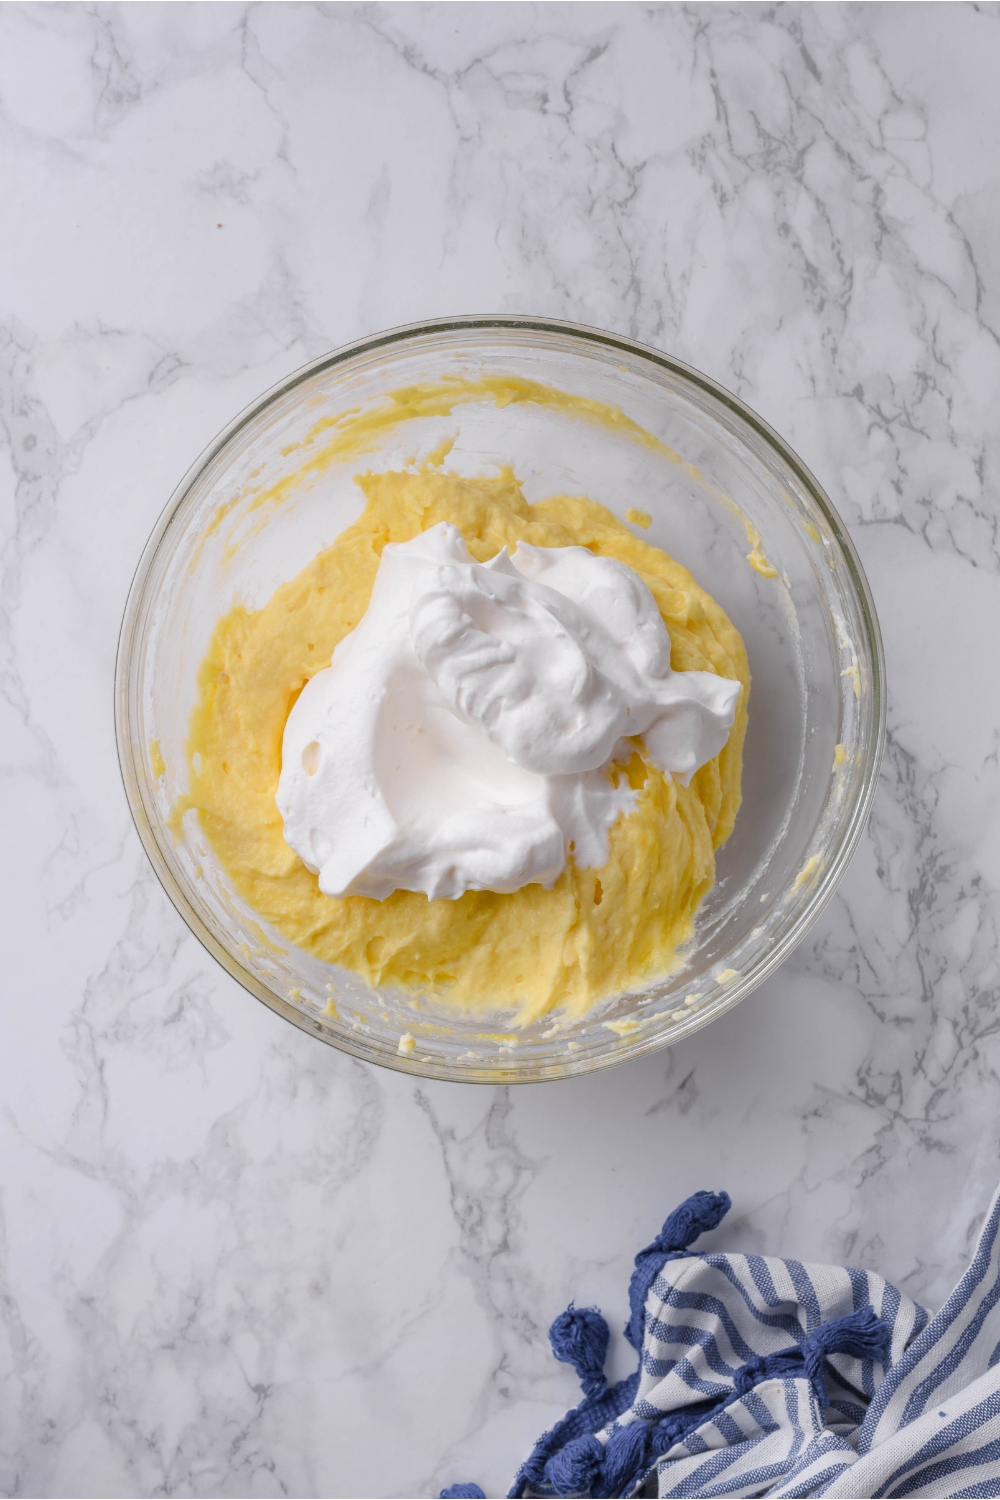 A clear bowl filled with yellow cheesecake batter and a scoop of whipped cream not yet combined.